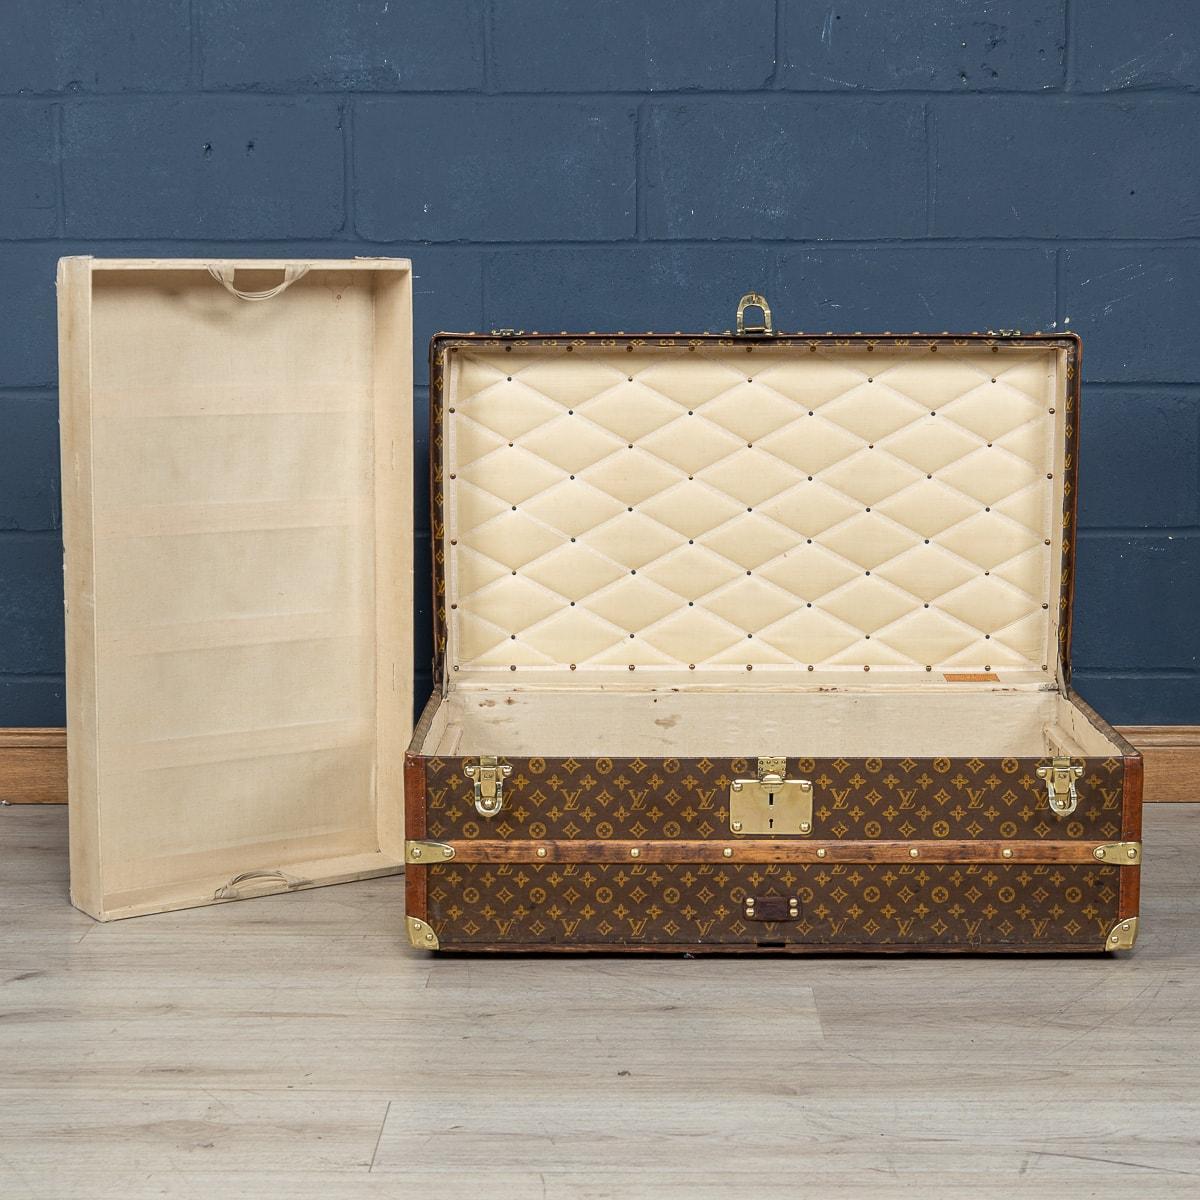 20th Century Louis Vuitton Cabin Trunk In Monogram Canvas, France c.1930 For Sale 2